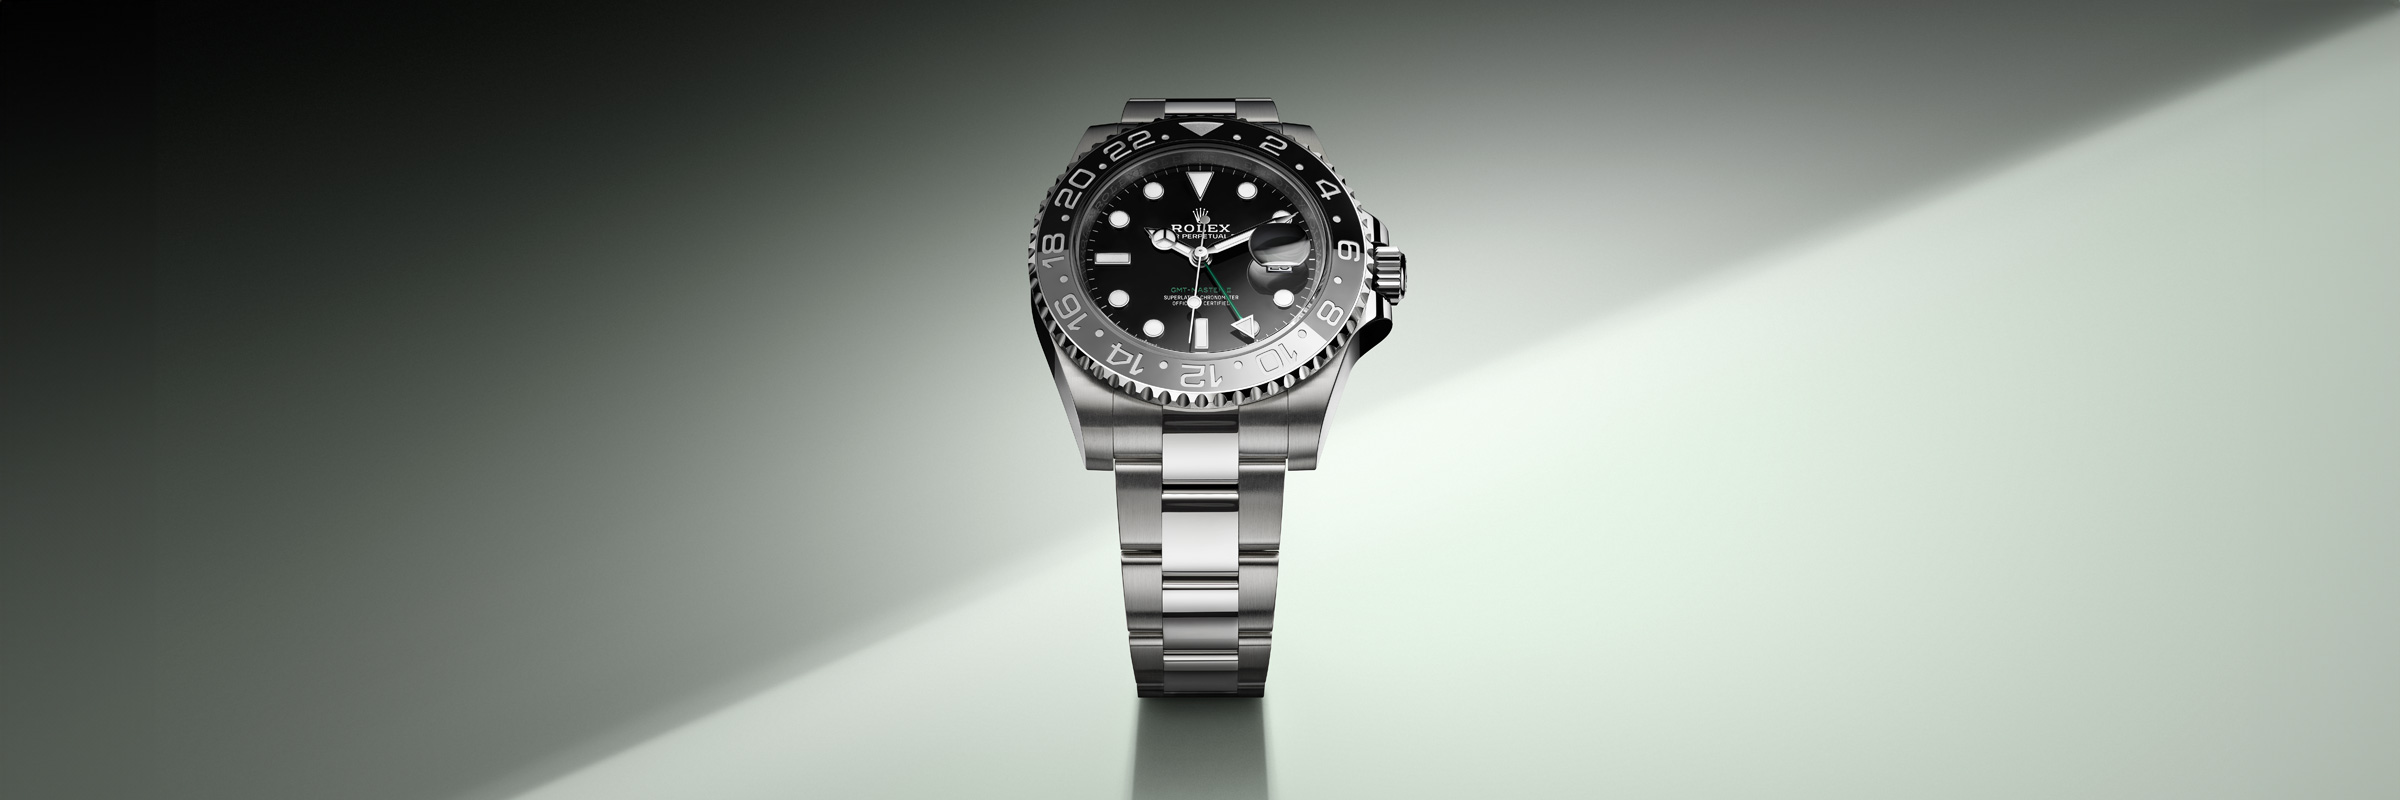 GMT-Master II watches